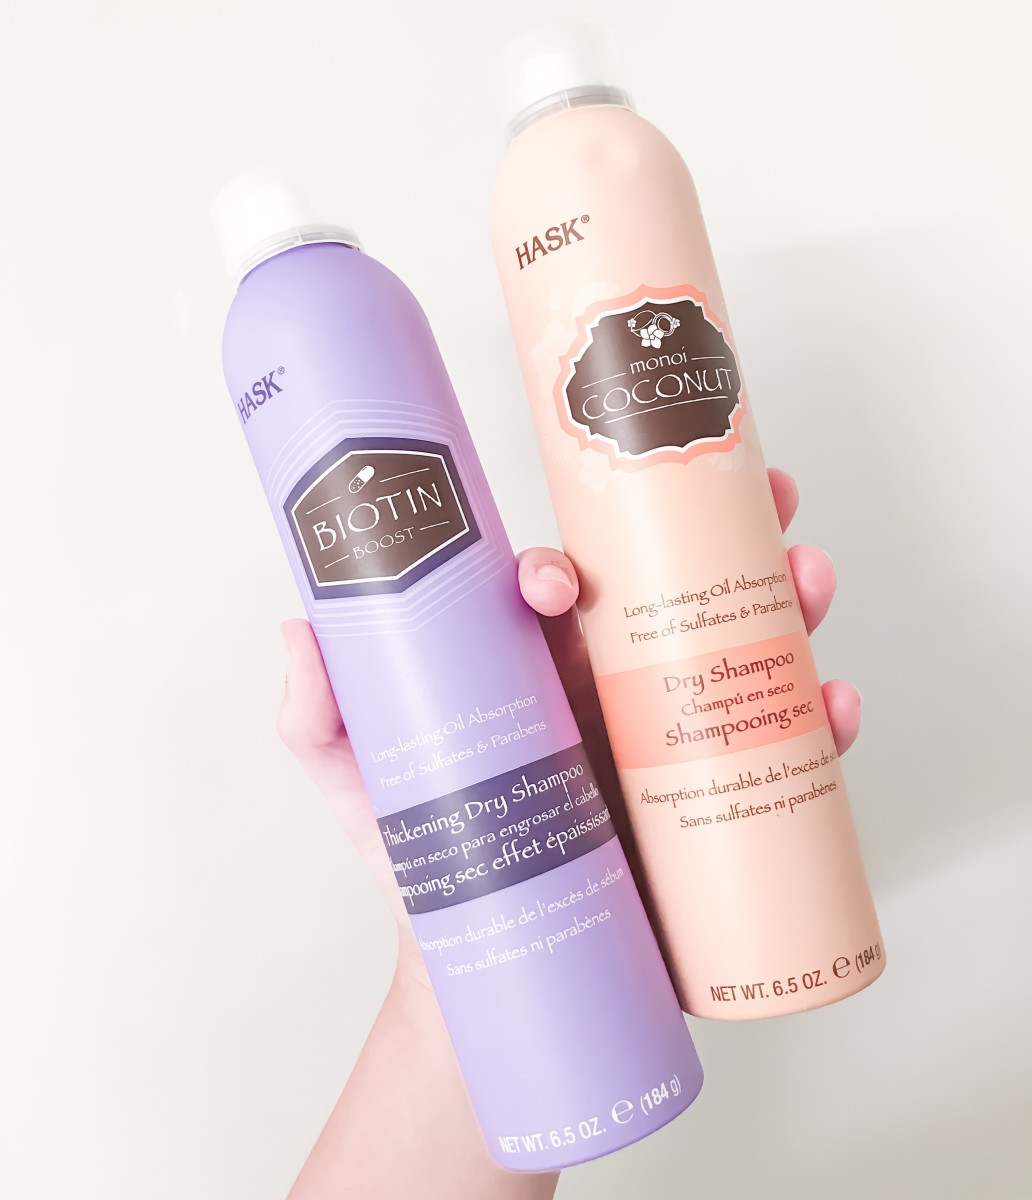 Hask is my absolute favorite dry shampoo brand.